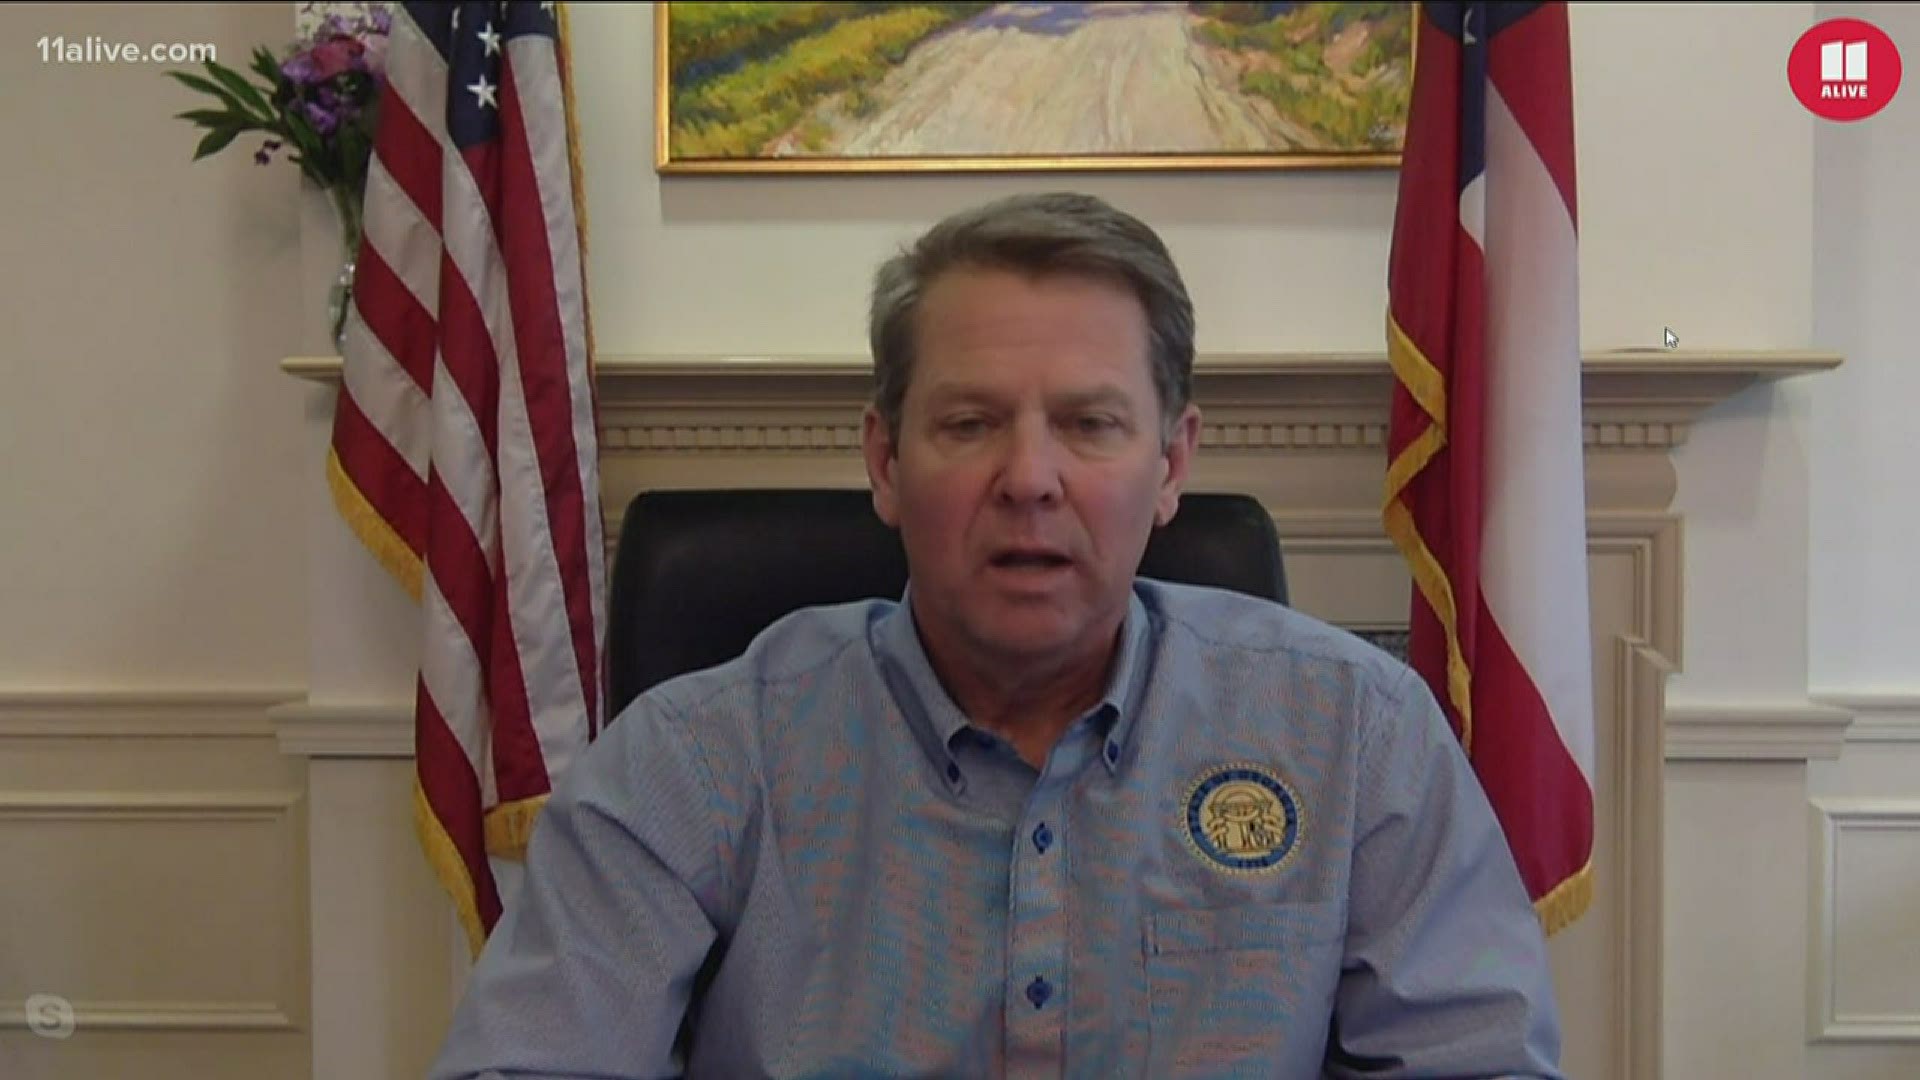 Kemp said we will have to continue to trust the business community to do the right thing.